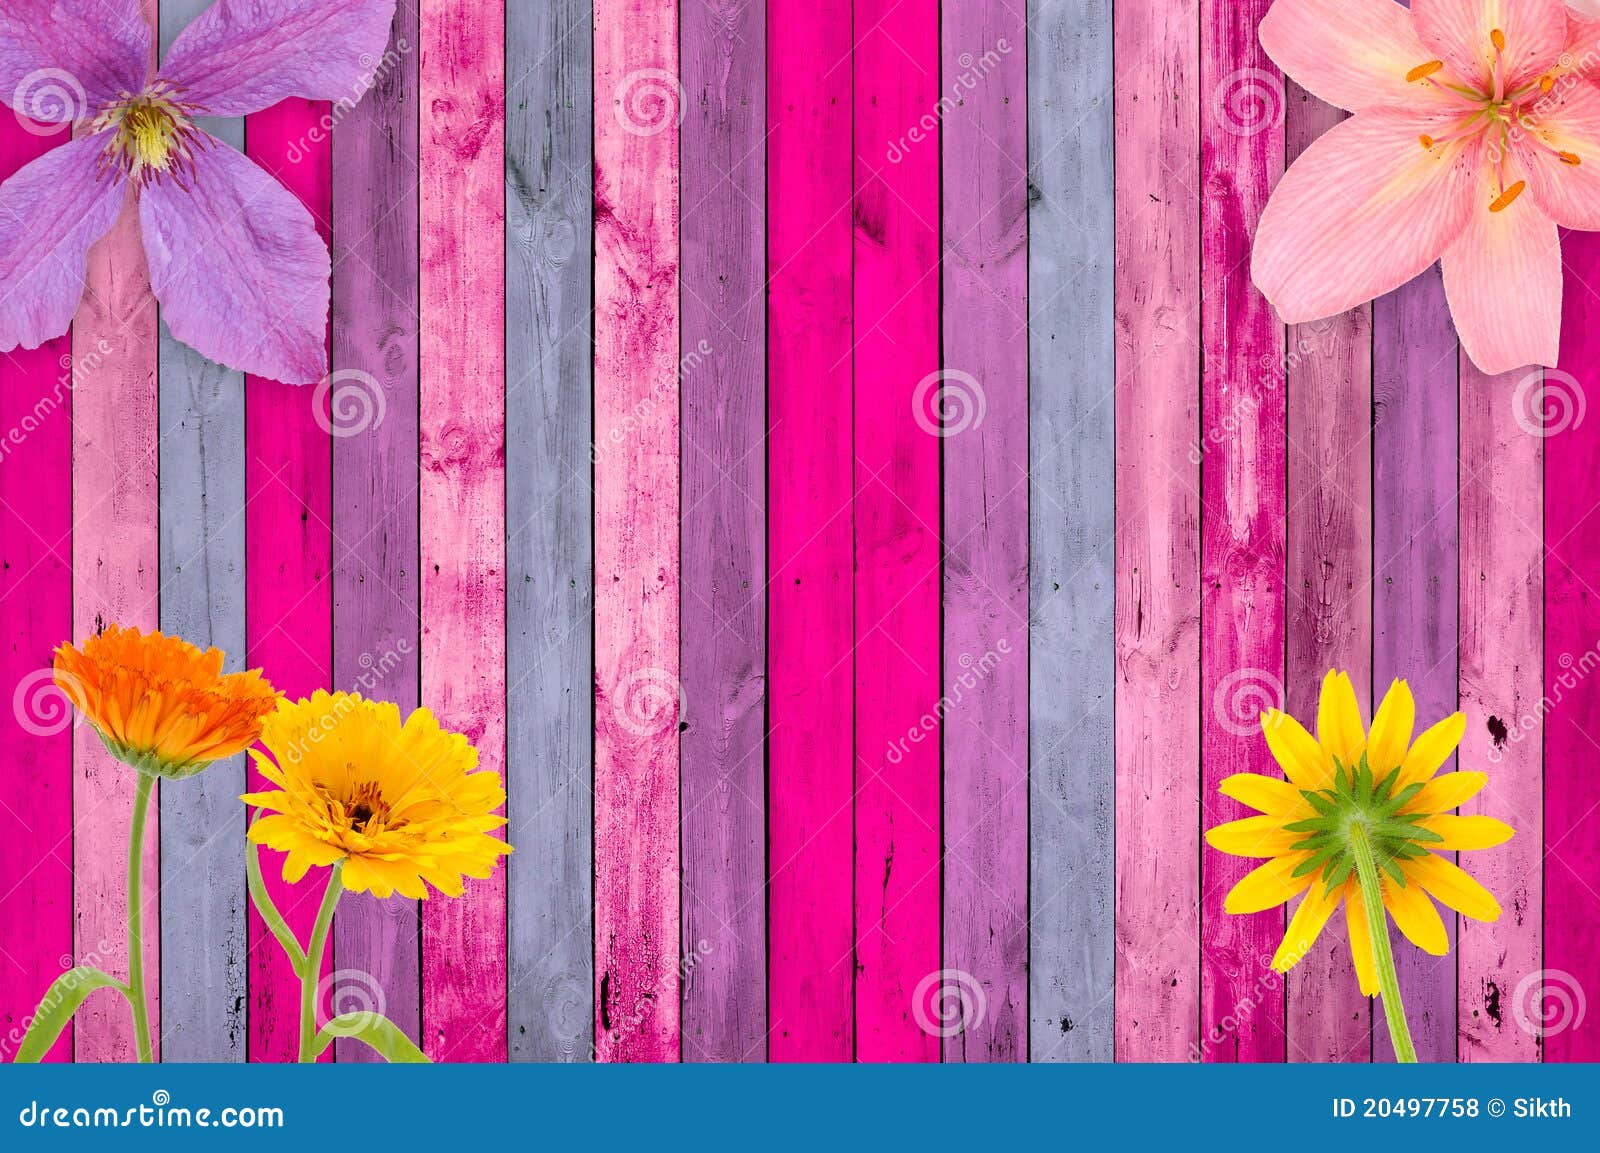 Pink Wood Background with Flowers Stock Photo - Image of design, girlish:  20497758